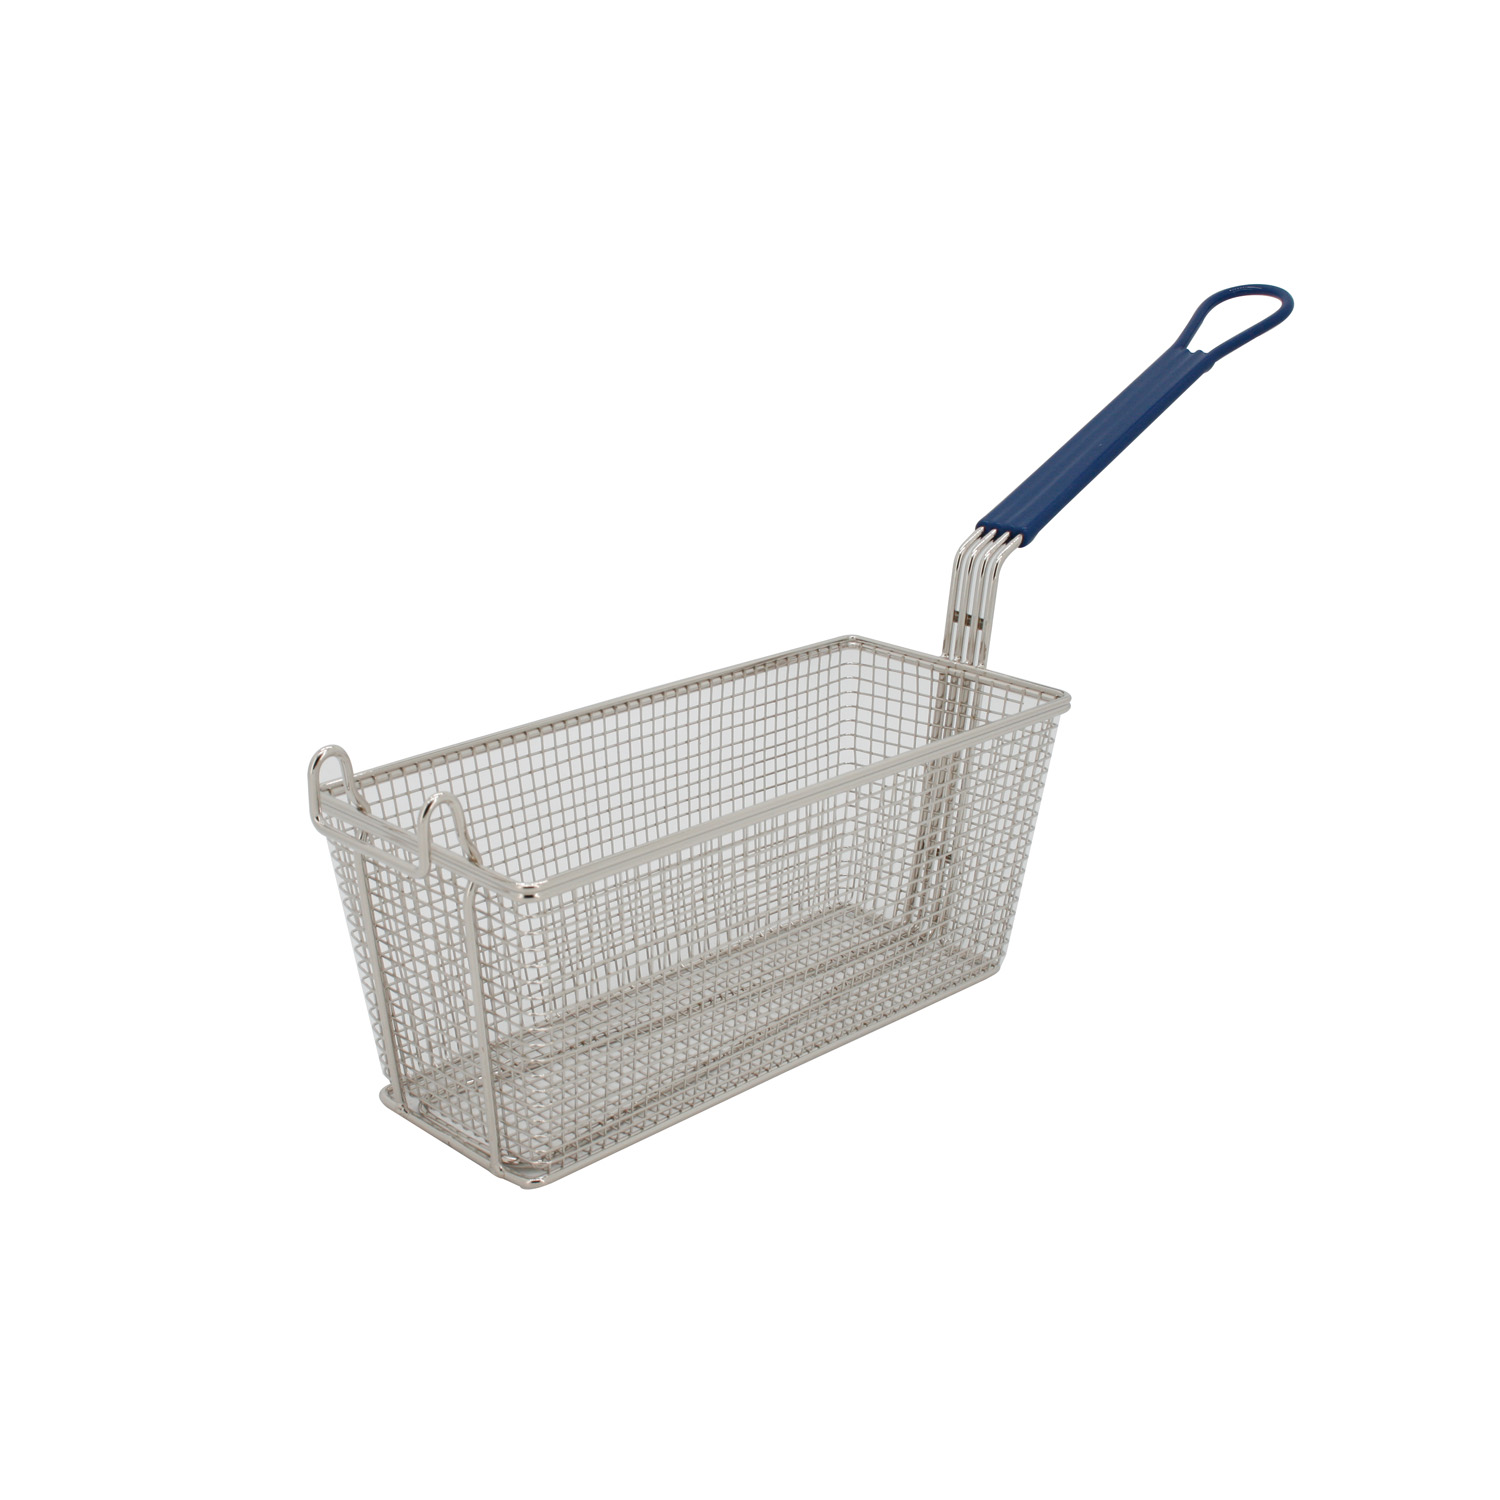 CAC China SPFB-3 Nickel-Plated Fry Basket with Blue Handle 13-1/4" x 5-3/4" x 5-1/2"